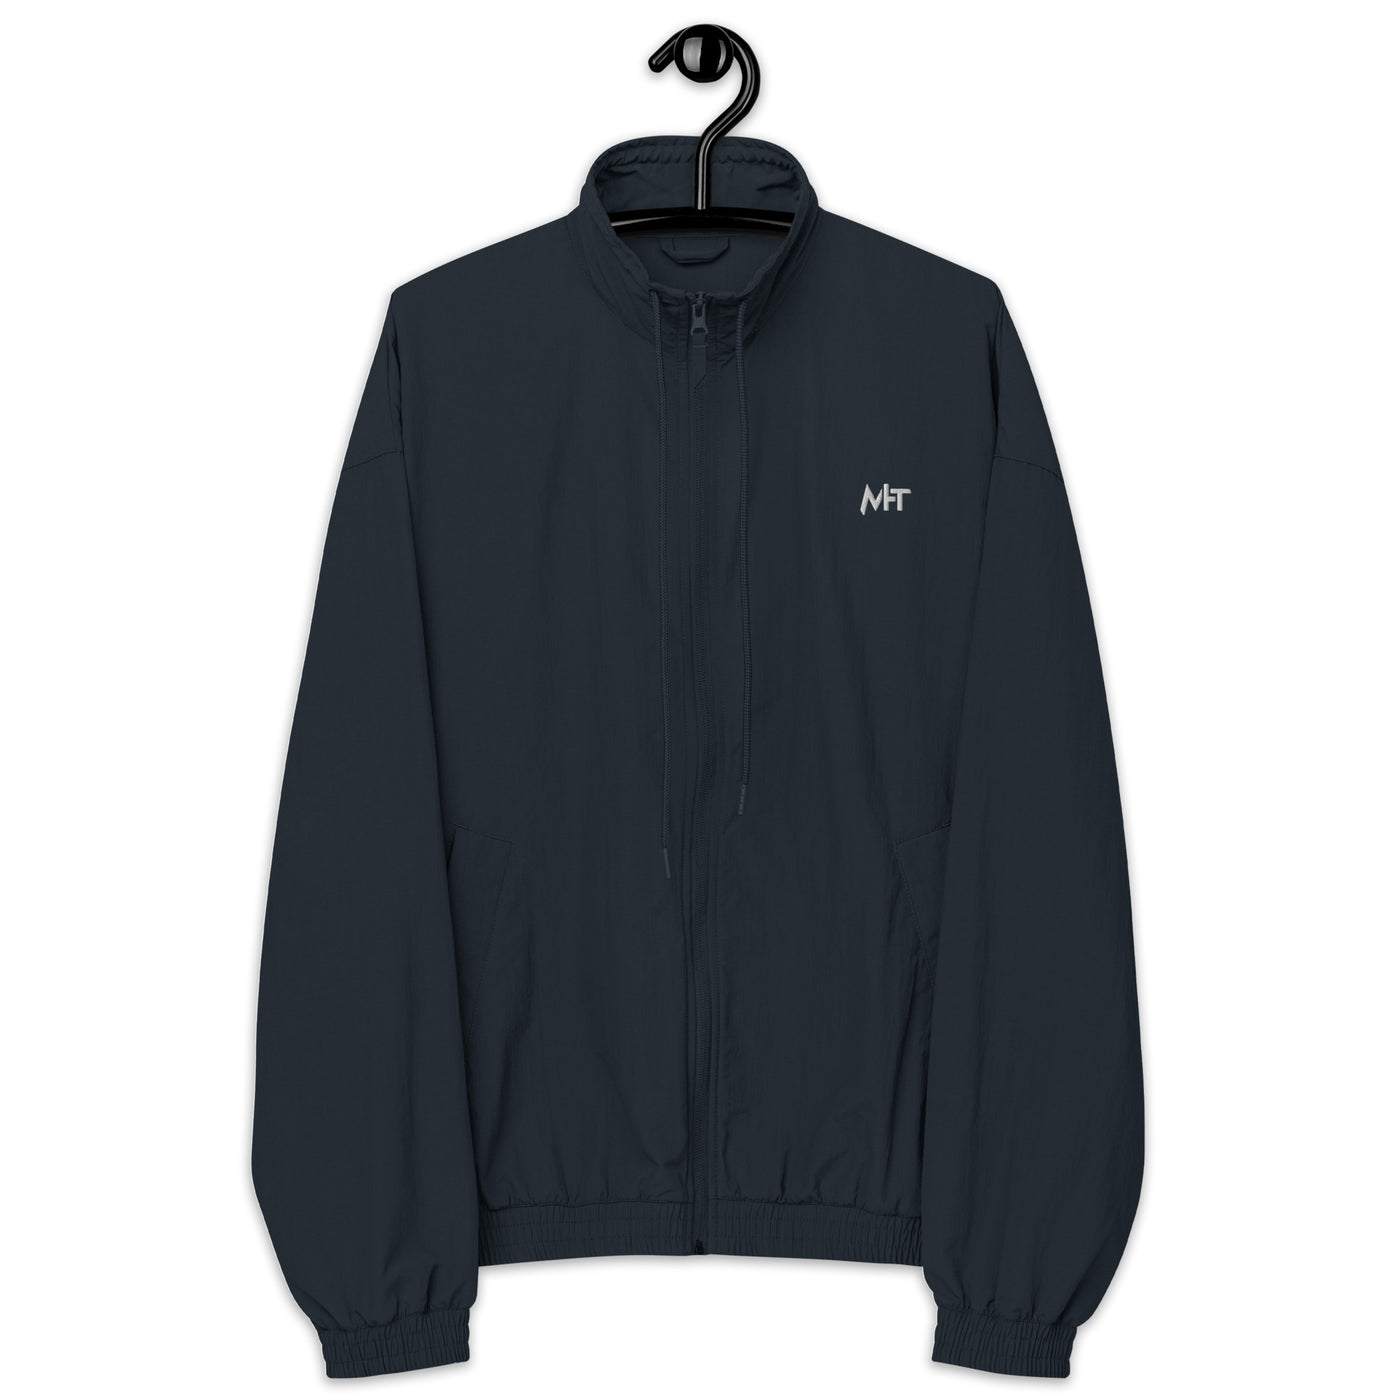 MHT - Recycled tracksuit jacket